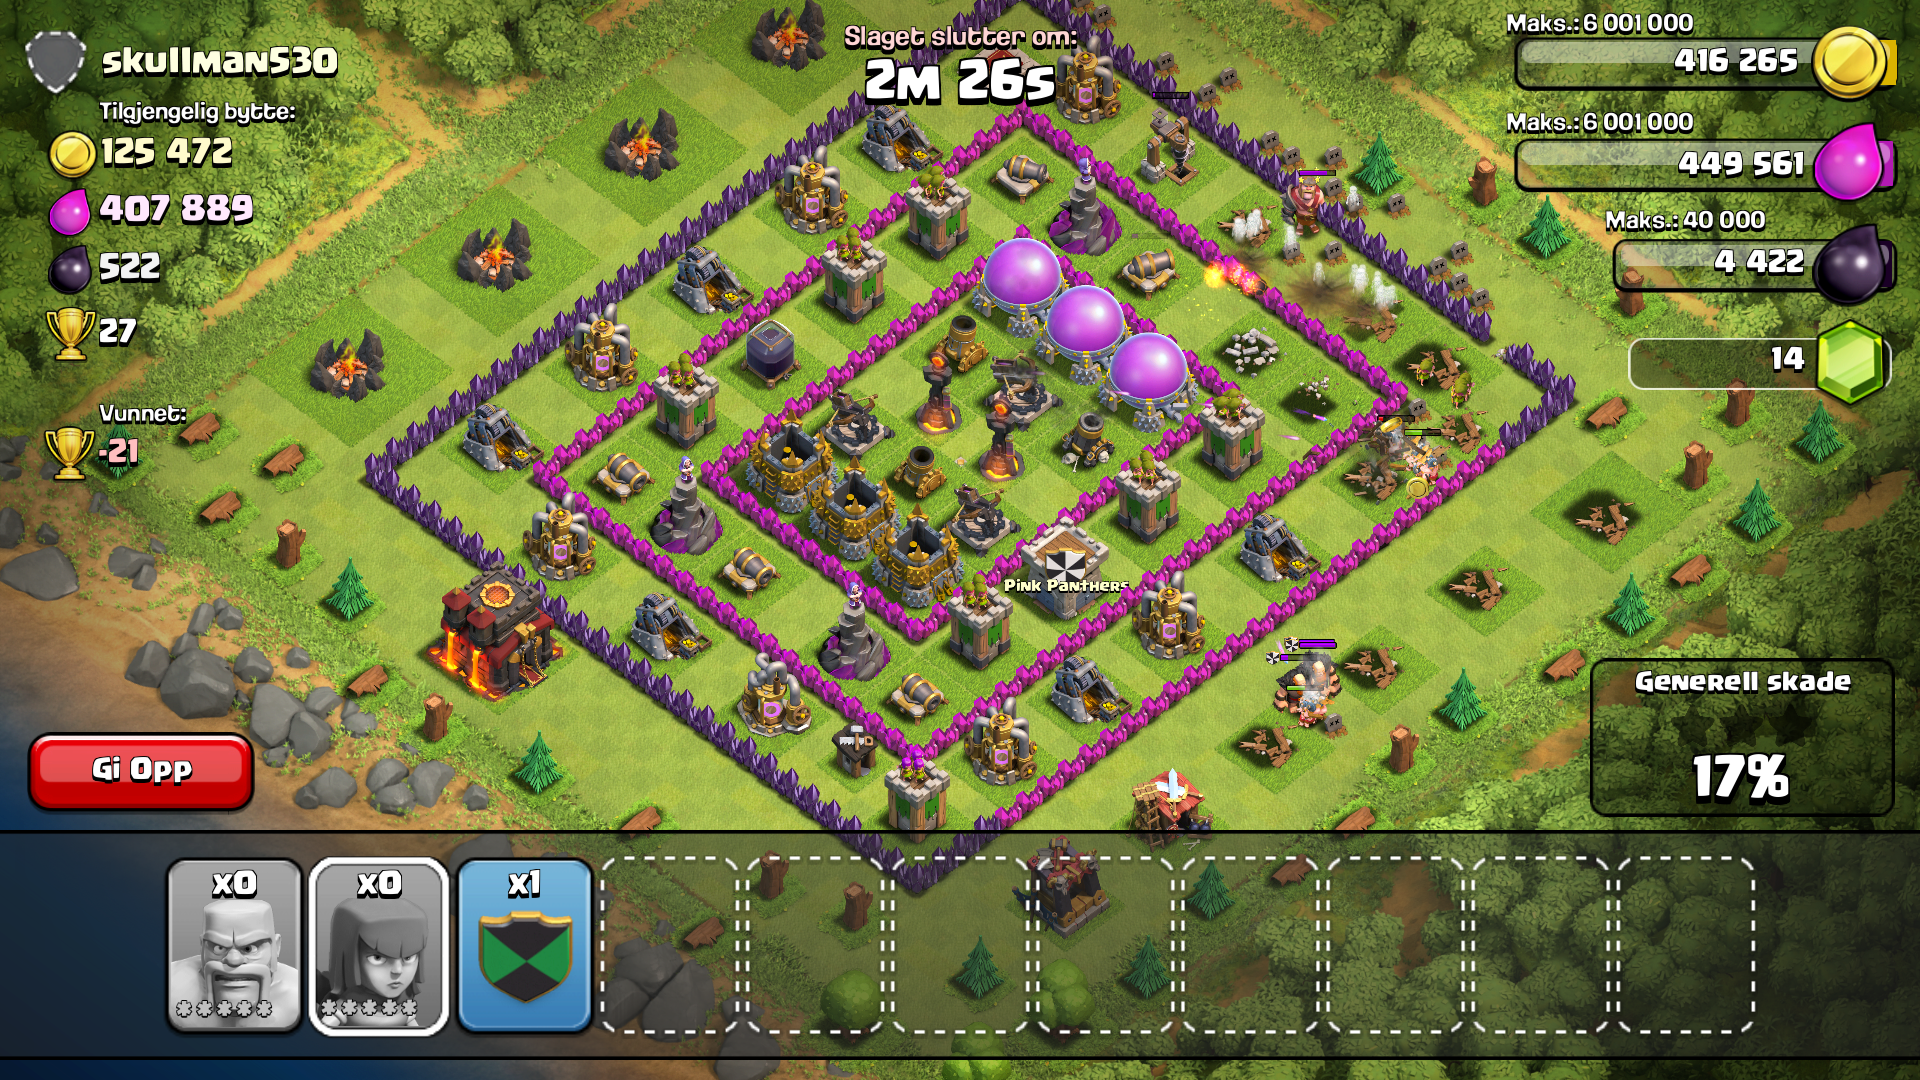 Gallery of Clash Of Clans Tips Town Level 10 Layouts.